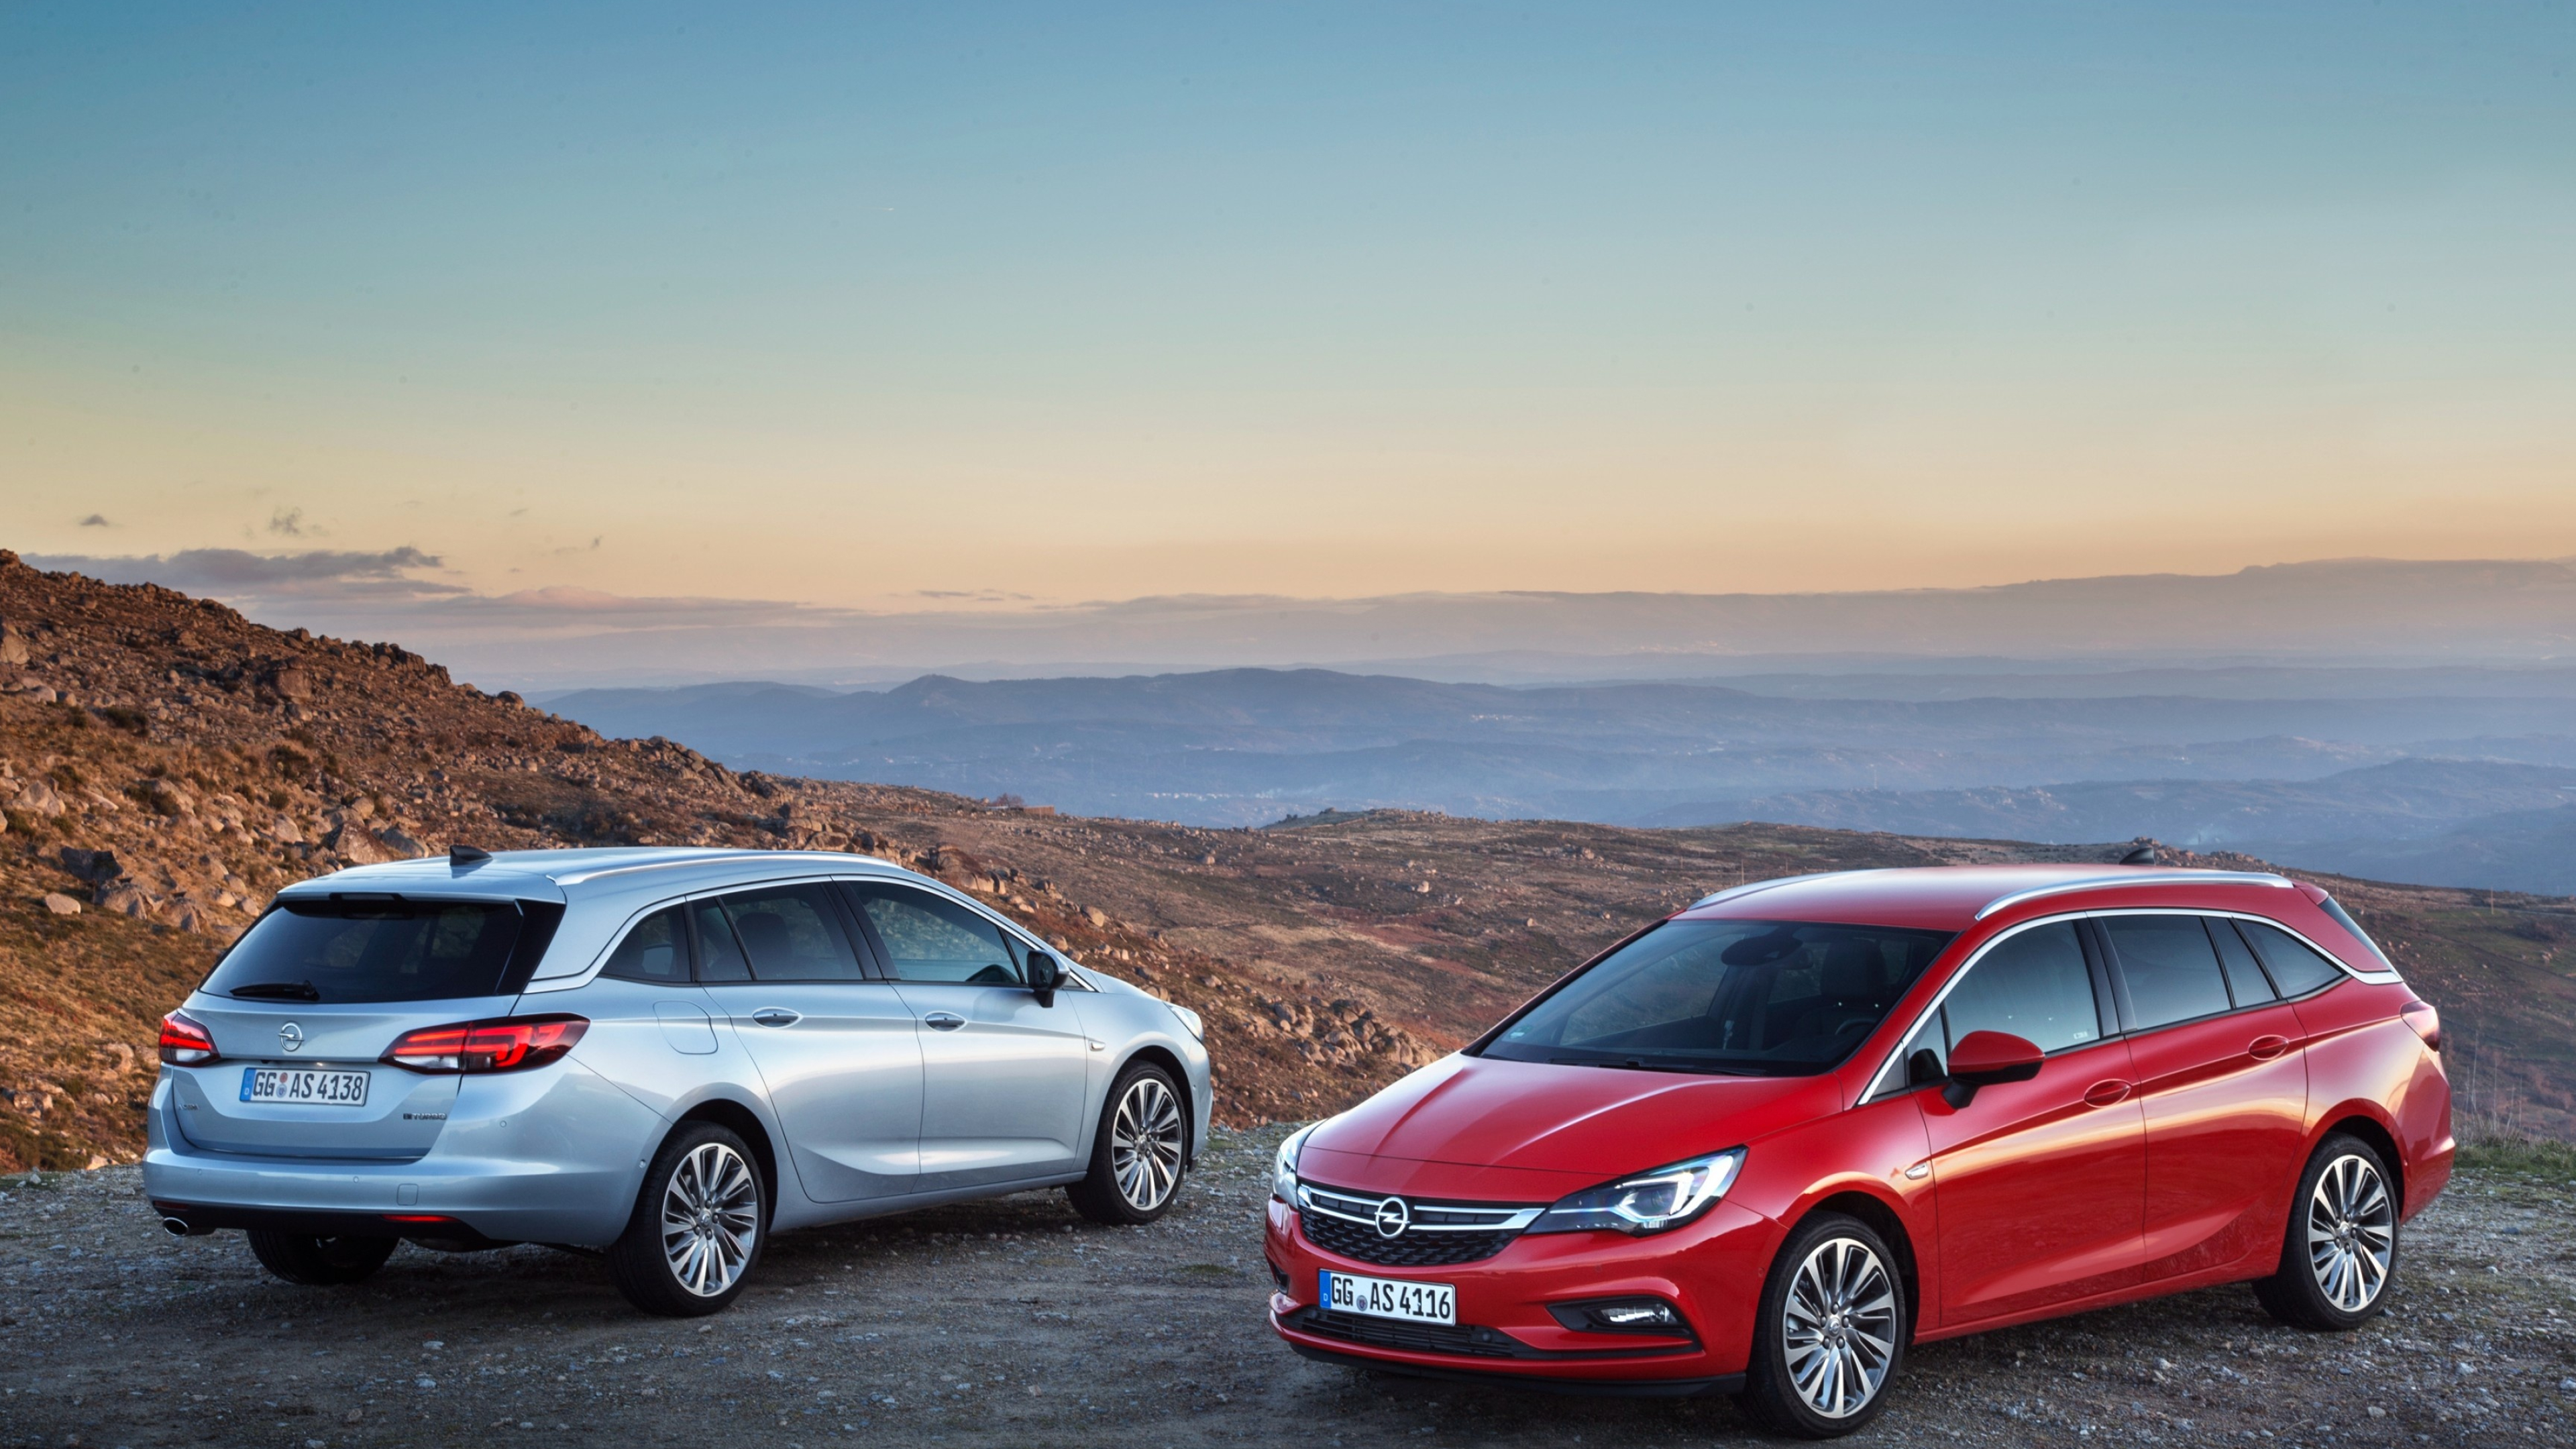 Opel Astra Sports Tourer, Sports red cars, Bikes and cars wallpaper, Stylish appearance, 3840x2160 4K Desktop